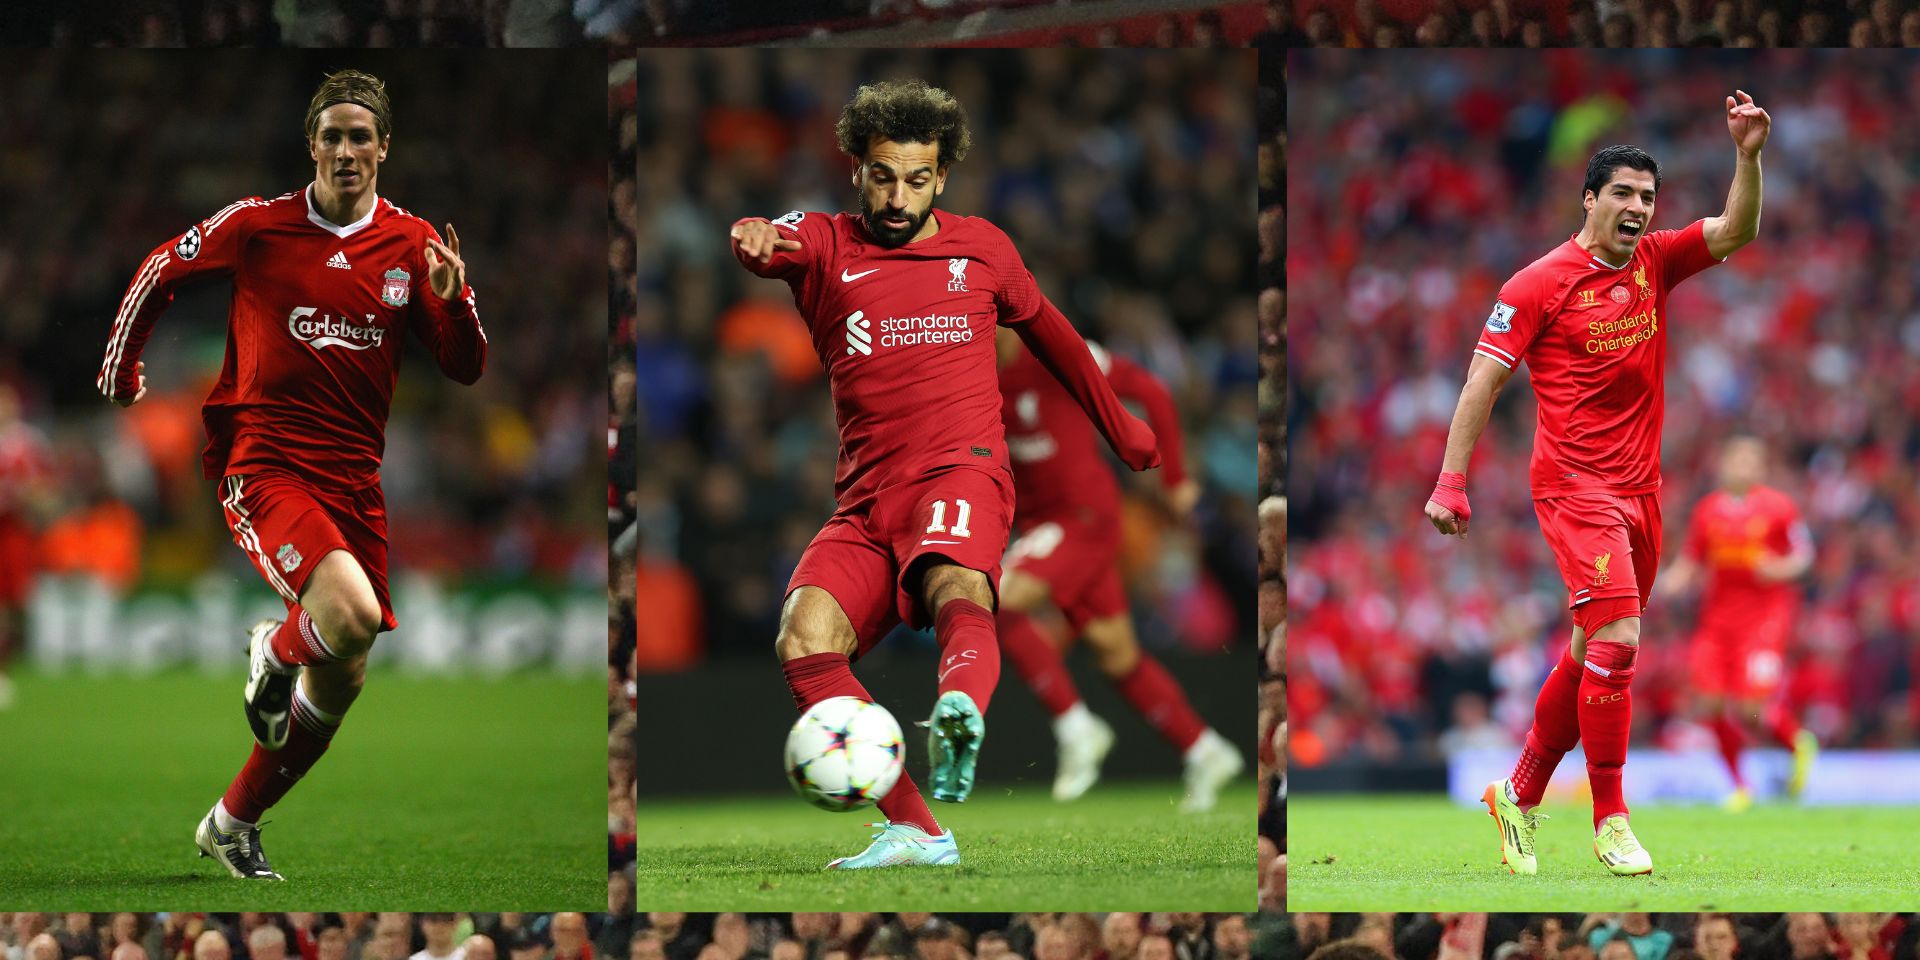 Outstanding Salah, Suarez and Torres stat definitively answers who was the best to play for Liverpool